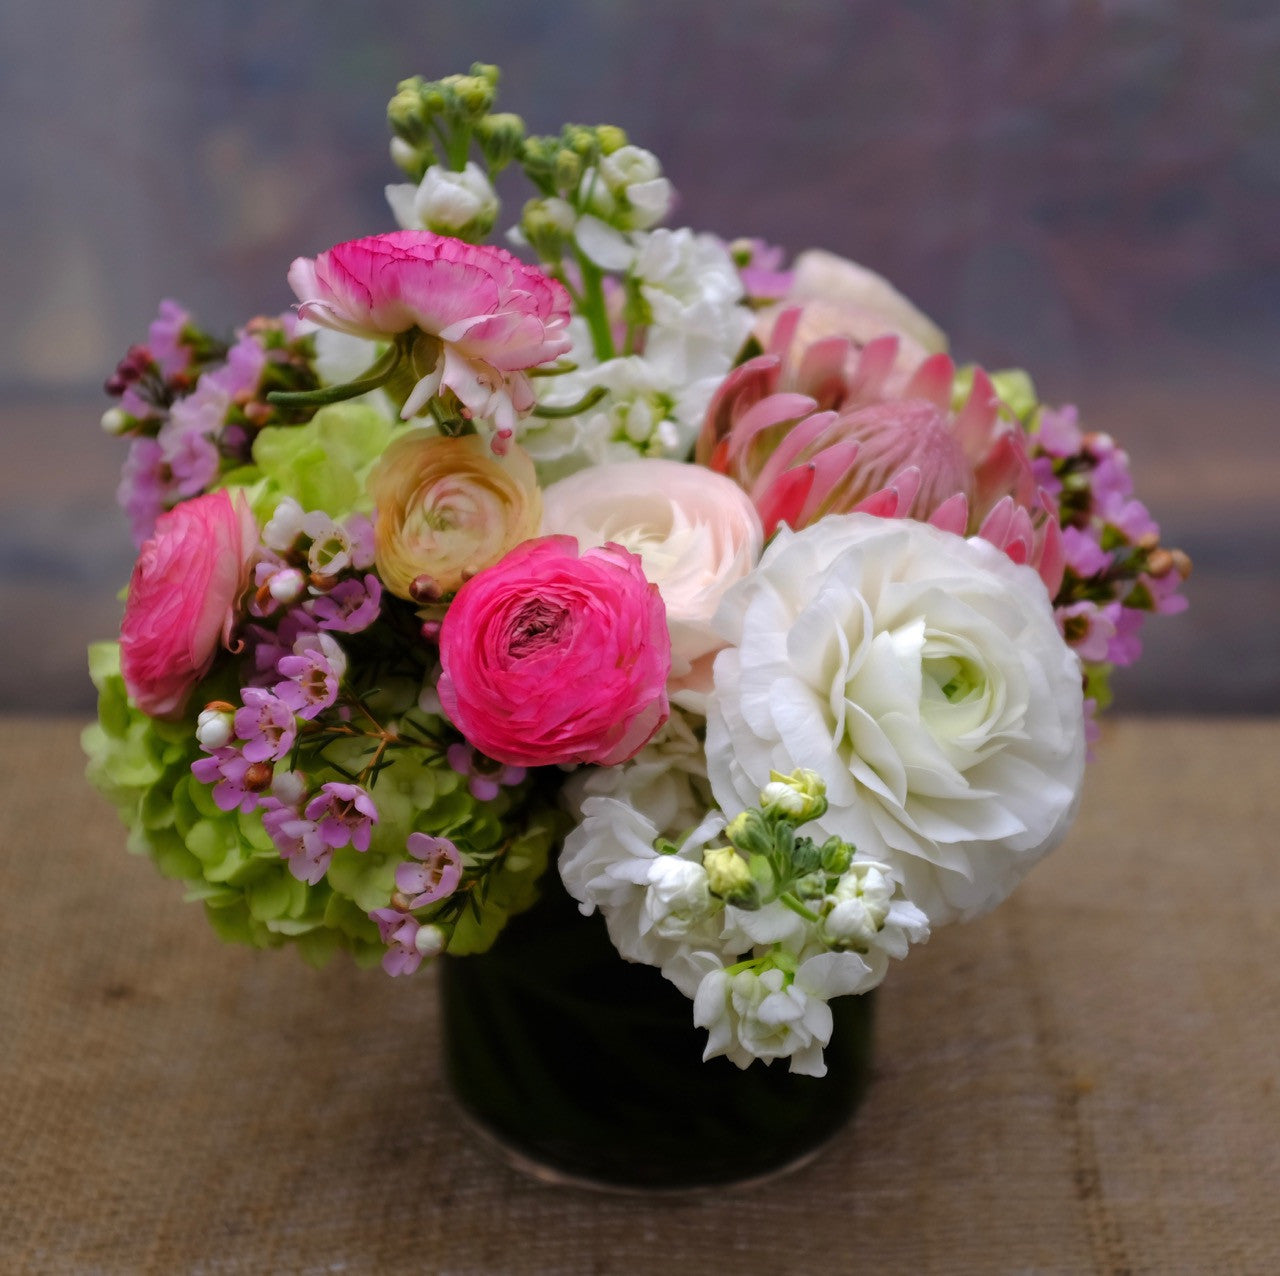 Juneau Bouquet with pink and white Ranunculus and Protea. Designed by Michler's Florist in Lexington, KY 